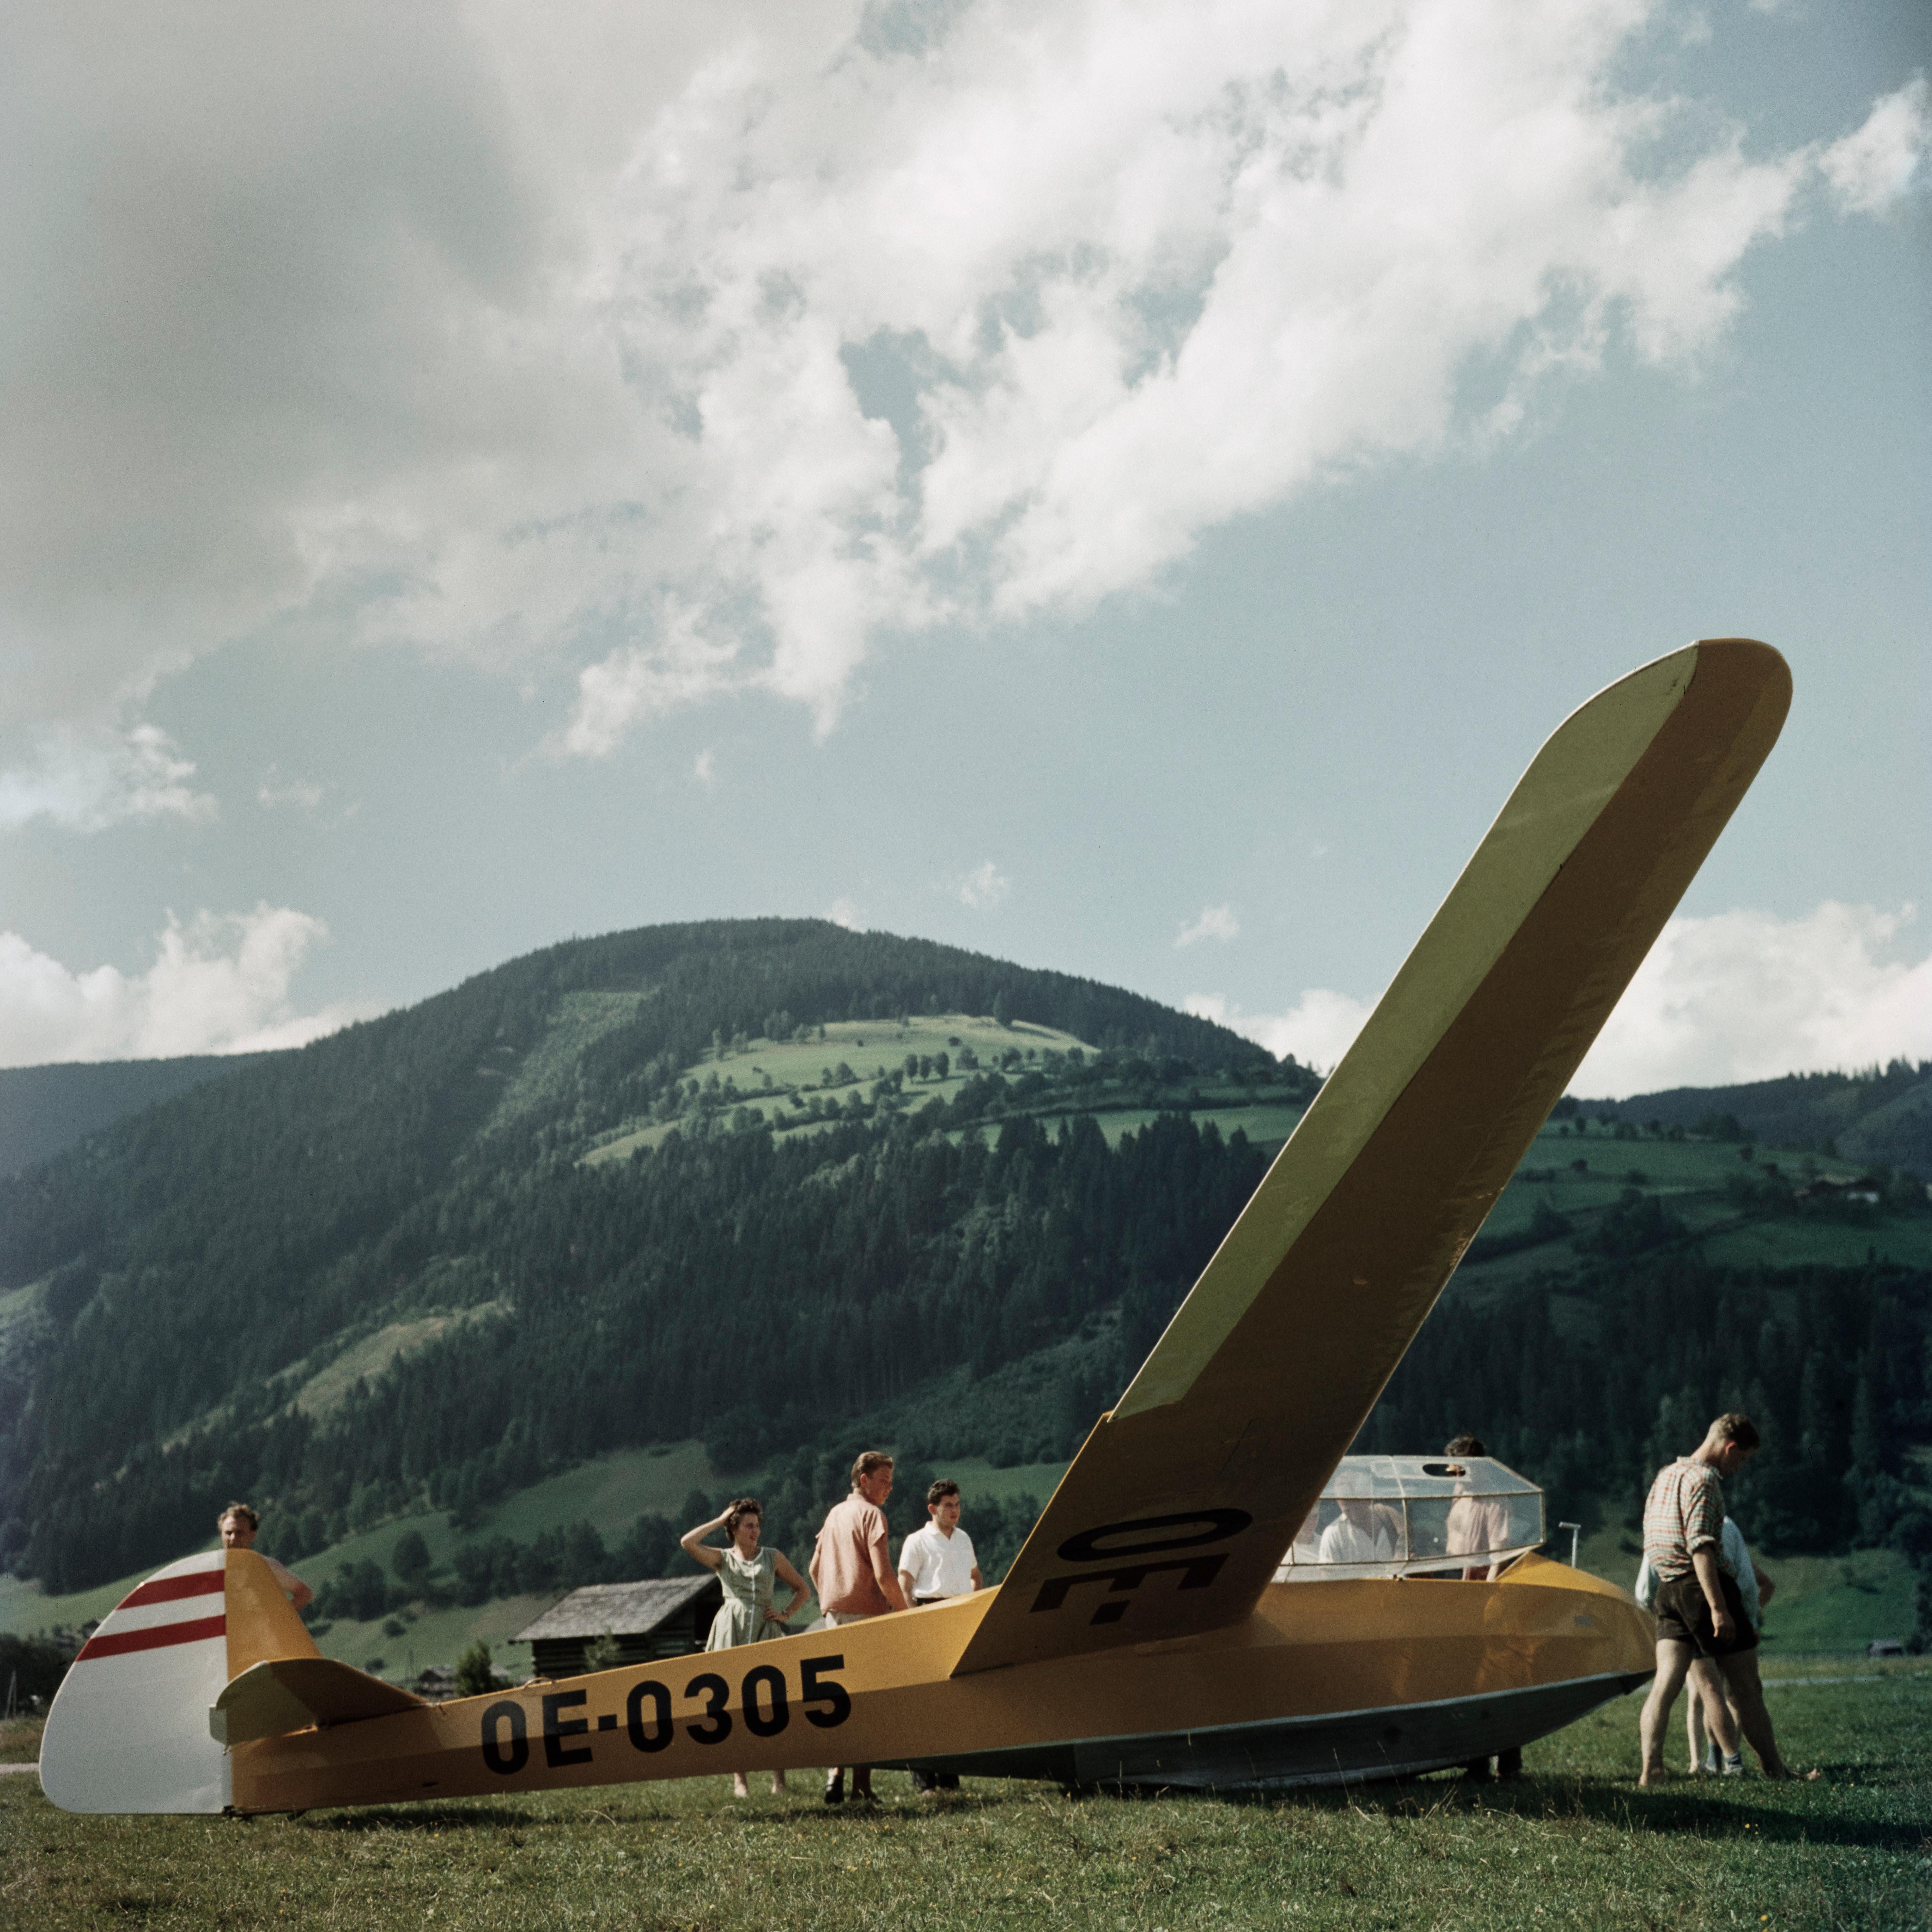 Slim Aarons Color Photograph - Mittersill airport, Austria